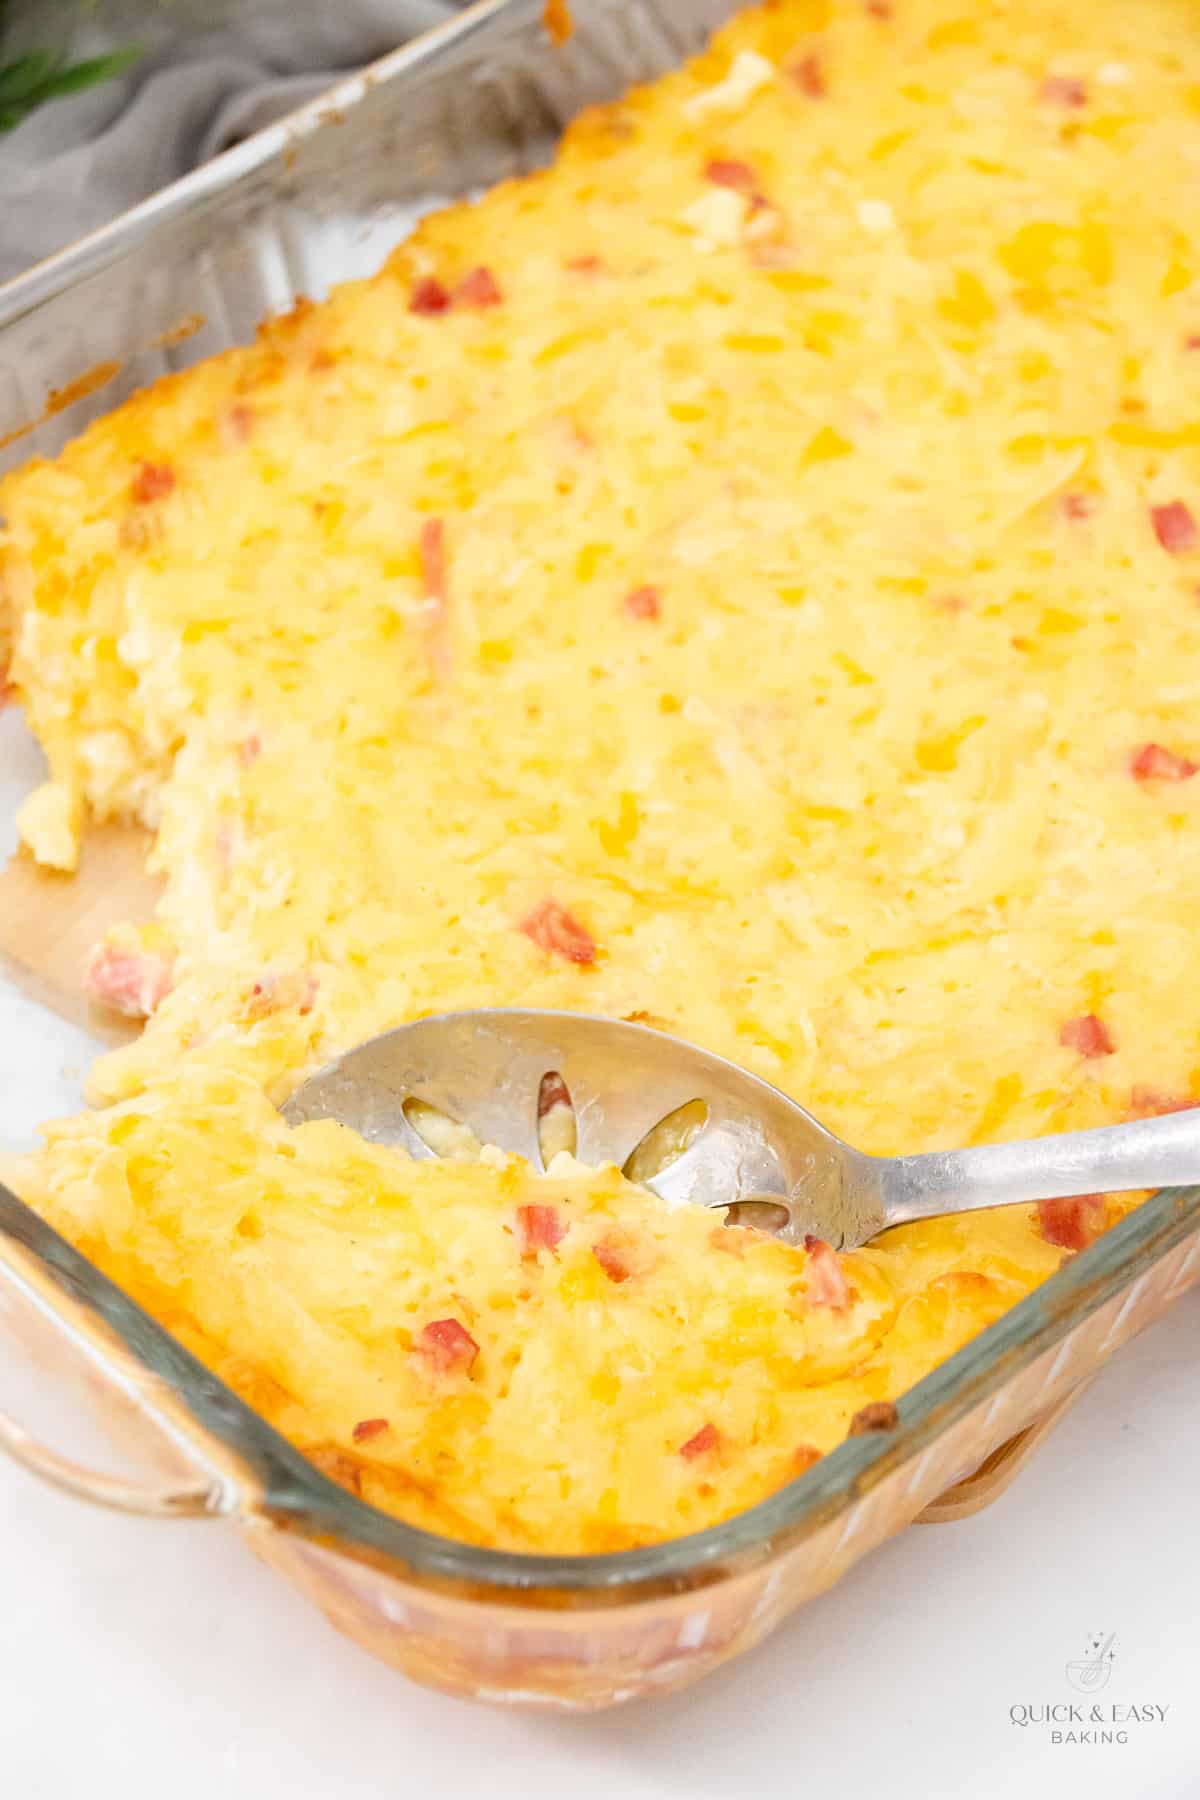 Top view of baked ham cheese and potato casserole with a large sliver spoonl